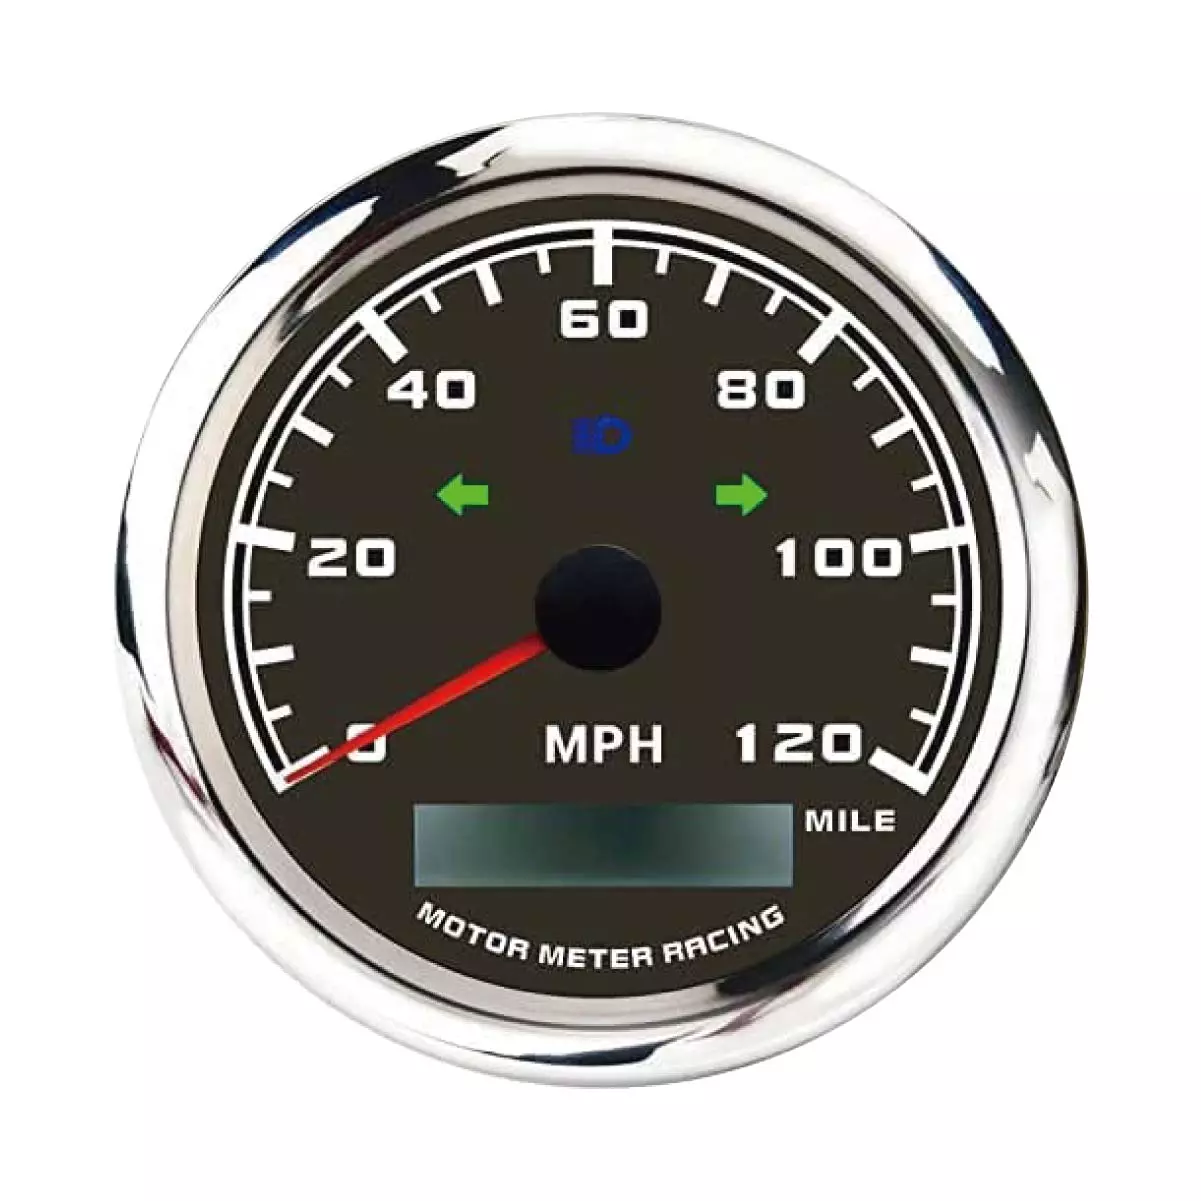 MOTOR METER RACING W Pro GPS Speedometer Odometer Waterproof for Car Boat Motorcycle Black with Turn Signal High Beam 120 Mph White LED GPS Sensor Included